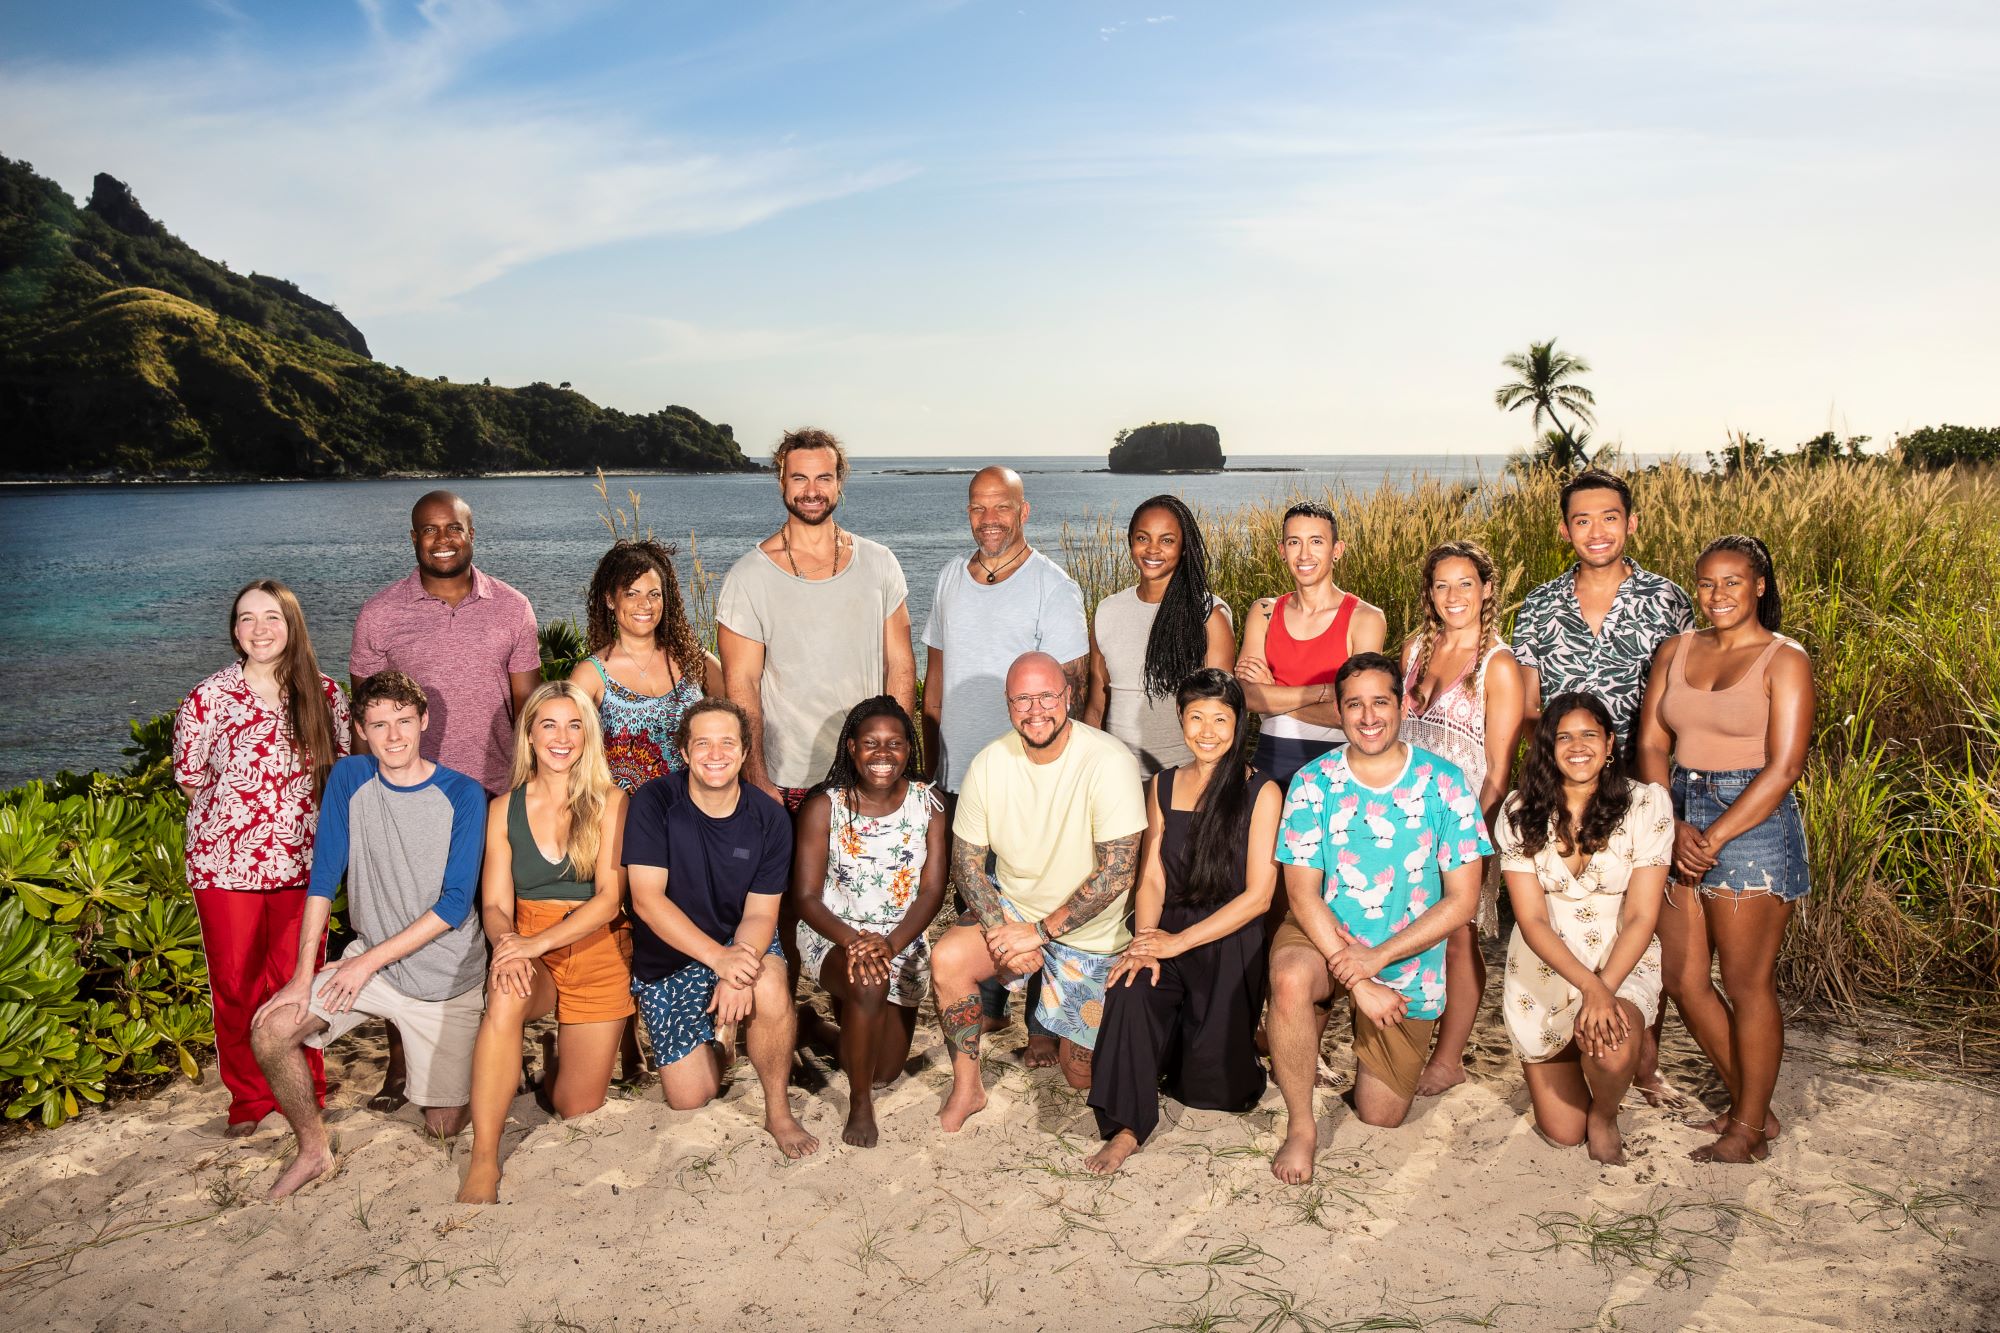 The 'Survivor' Season 42 cast, Lydia Meredith, Rocksroy Bailey, Marya Sherron, Jonathan Young, Mike Turner, Drea Wheeler, Romeo Escobar, Lindsay Dolashewich, Hai Giang, and Chanelle Howell. Pictured Bottom Left to Right: Zach Wurtenberger, Tori Meehan, Daniel Strunk, Maryanne Oketch, Jackson Fox, Jenny Kim, Omar Zaheer, and Swati Goel, poses for promotional pictures before the season begins and a winner is crowned. Ten castaways stand in the back row, while the other eight kneel in the front row.